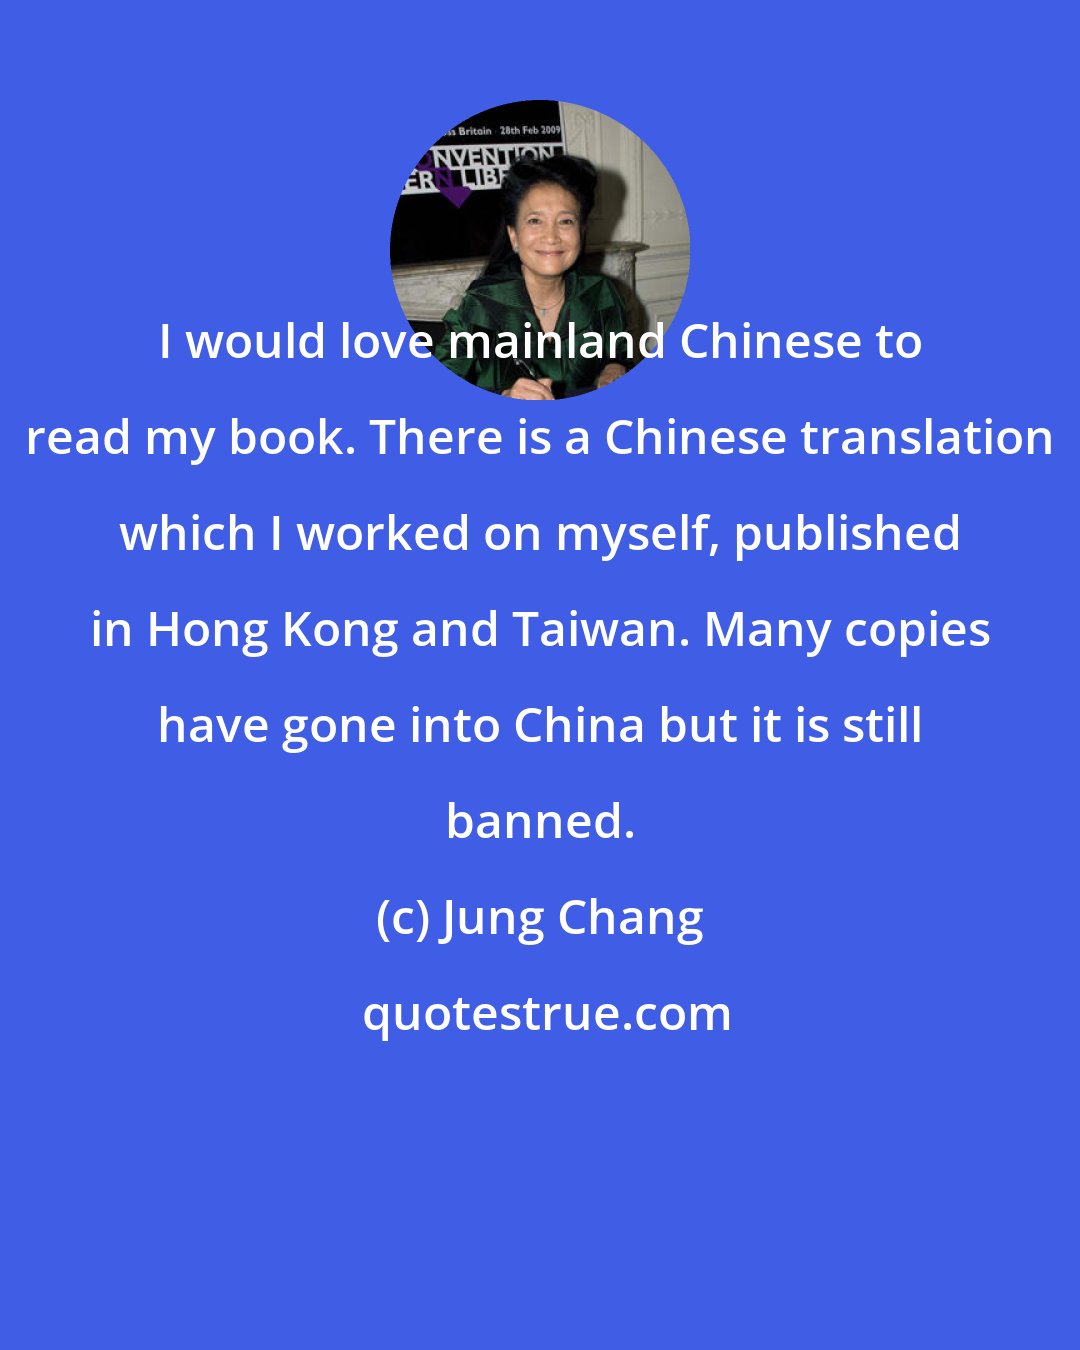 Jung Chang: I would love mainland Chinese to read my book. There is a Chinese translation which I worked on myself, published in Hong Kong and Taiwan. Many copies have gone into China but it is still banned.